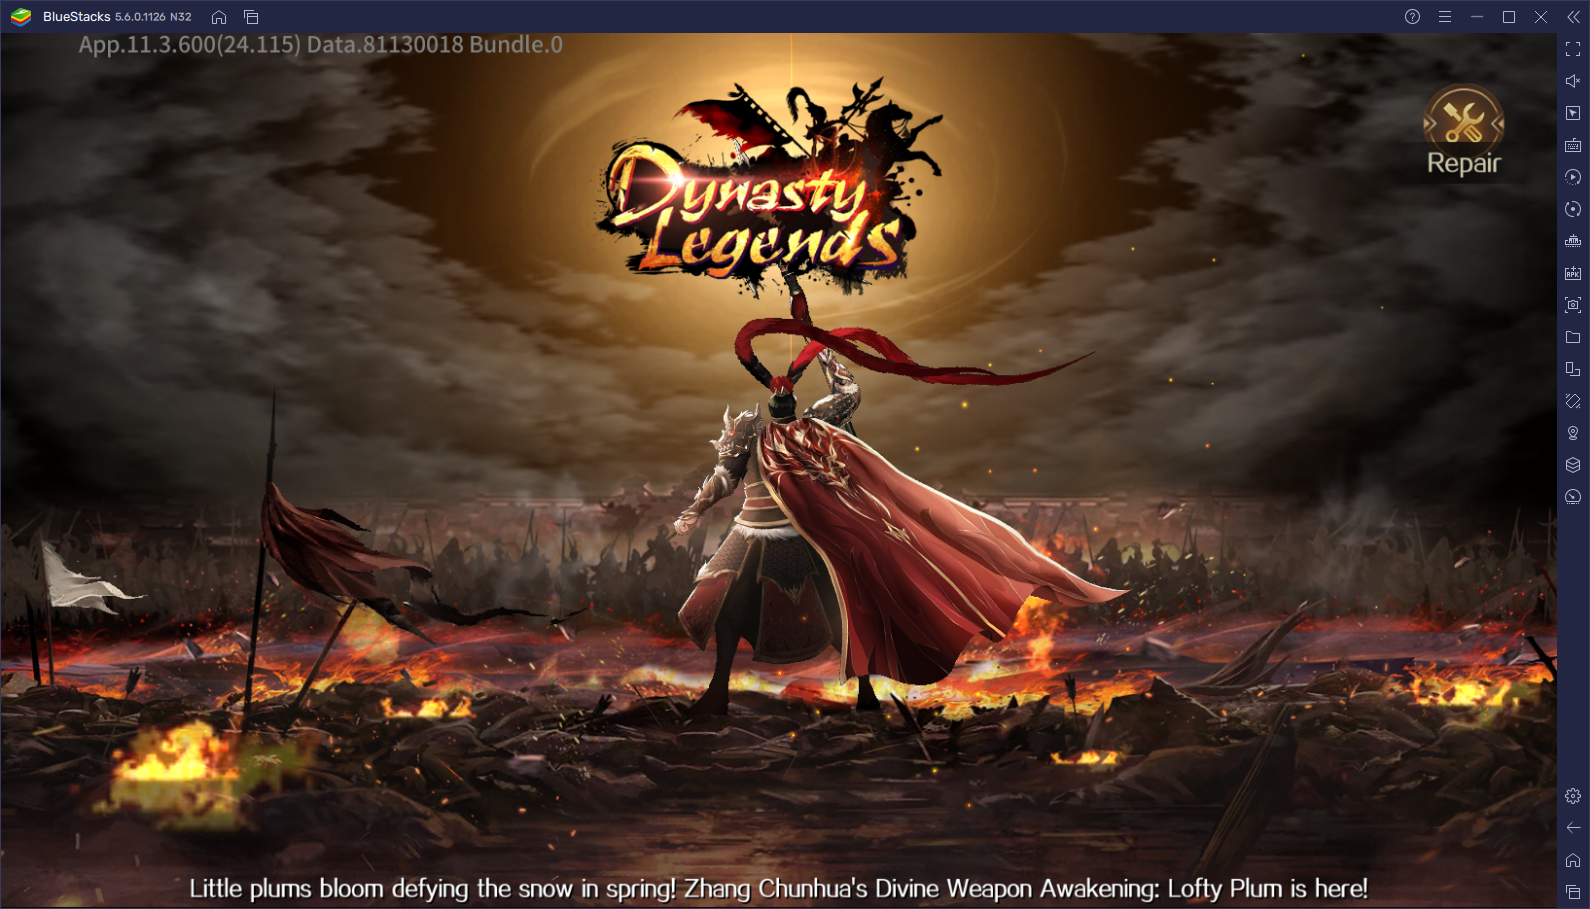 How to Get the Best Gameplay Experience in Dynasty Legends: Warriors Unite on PC with BlueStacks